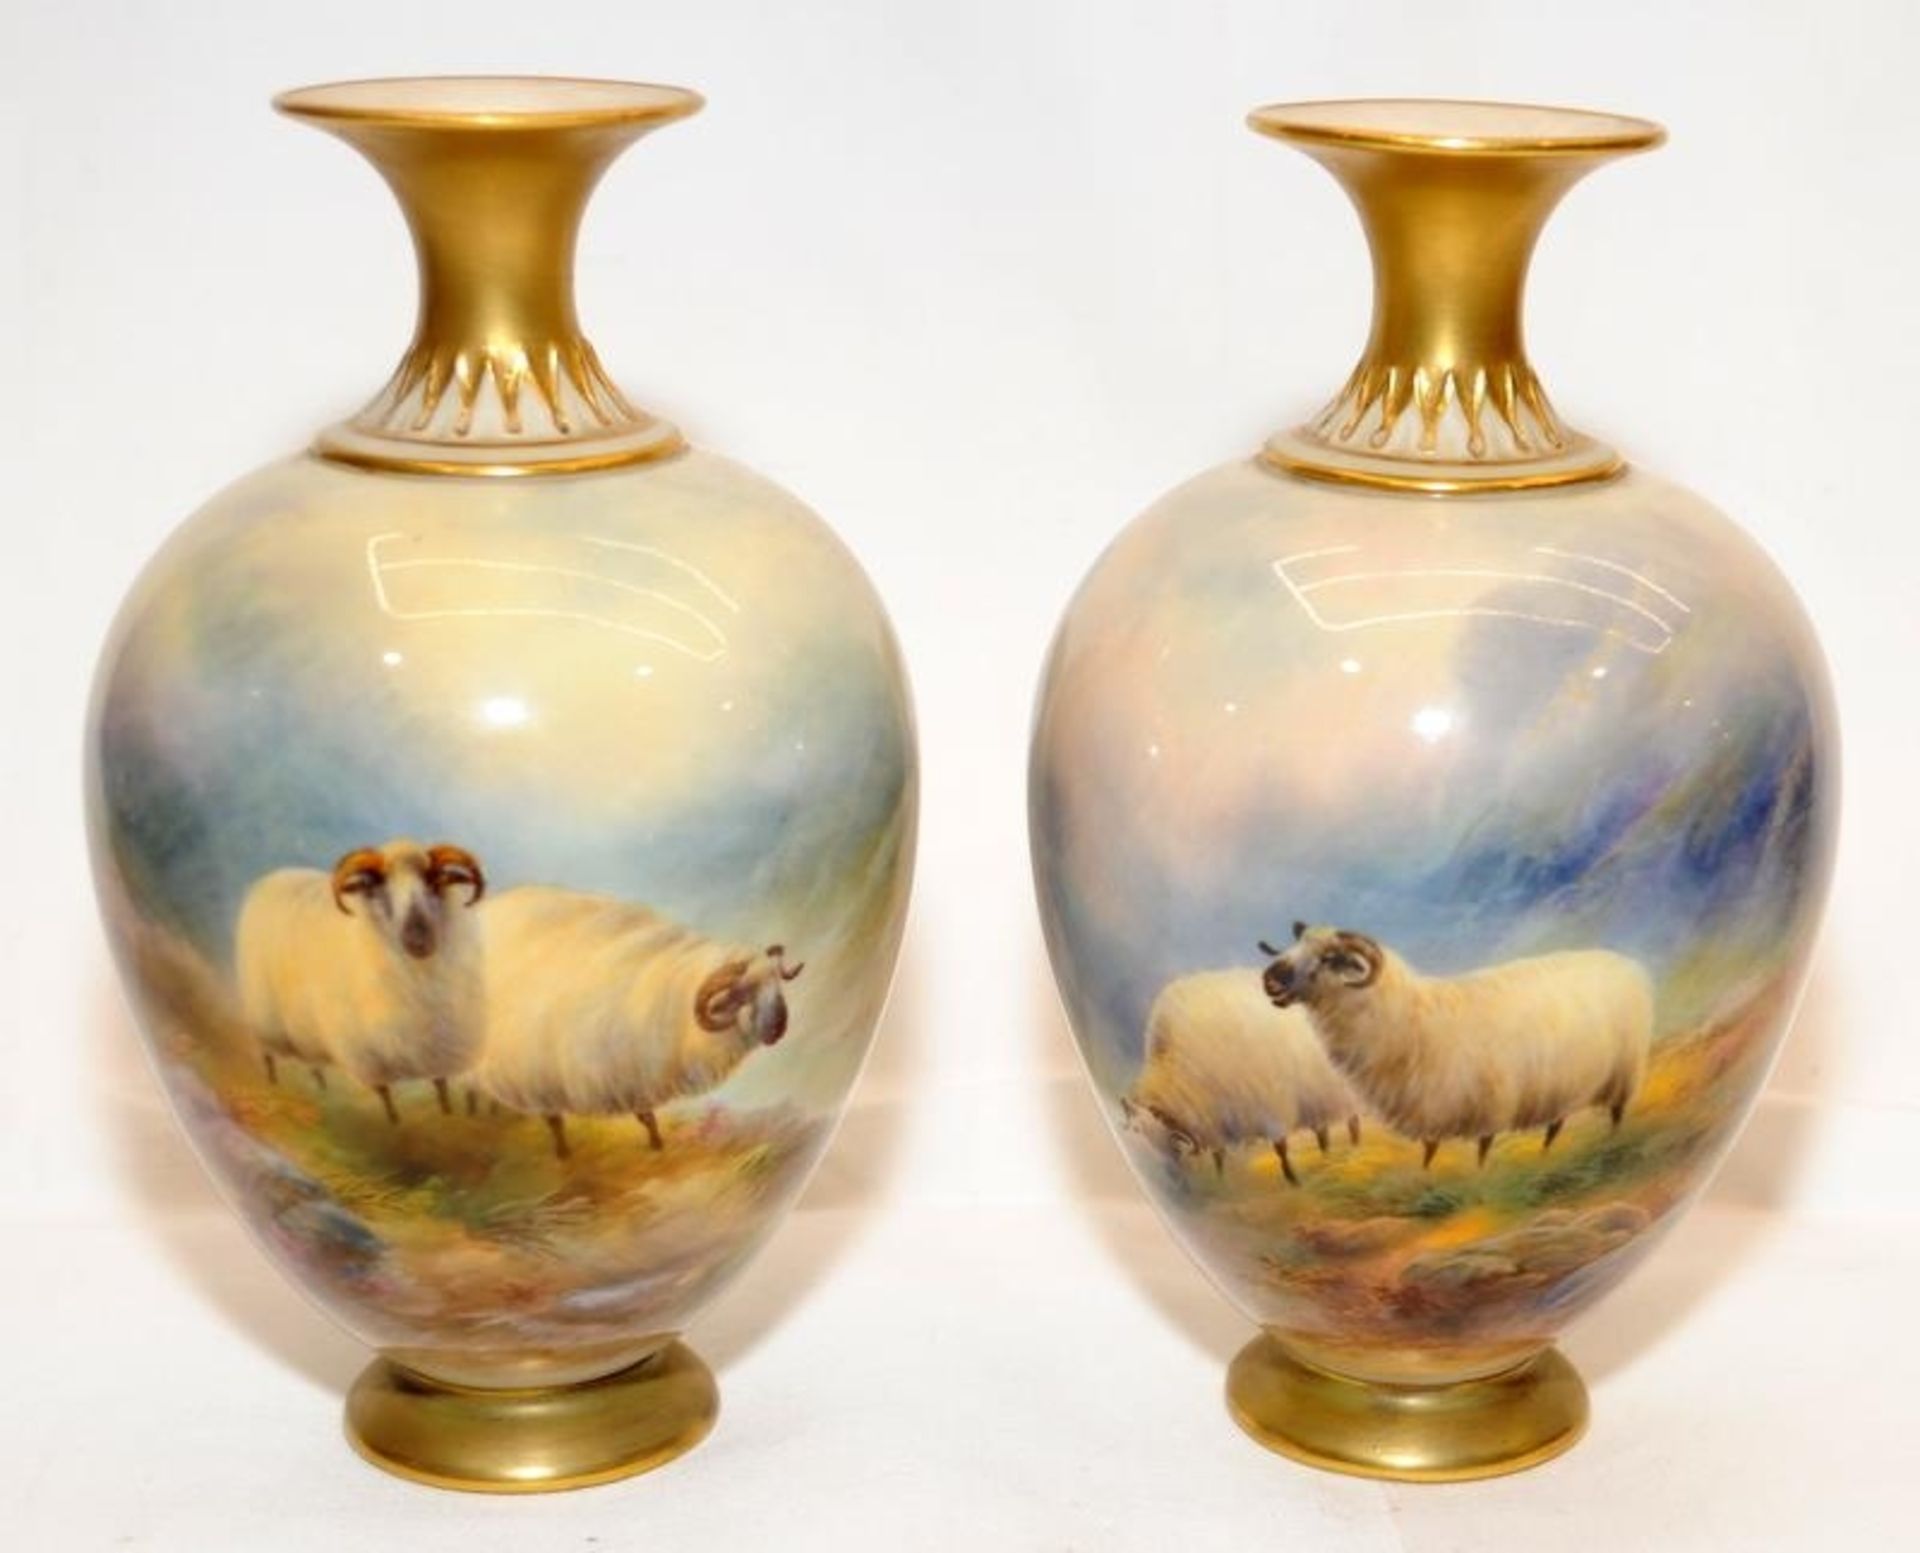 Pair of antique Royal Worcester blush ivory vases with gilded accents featuring hand painted